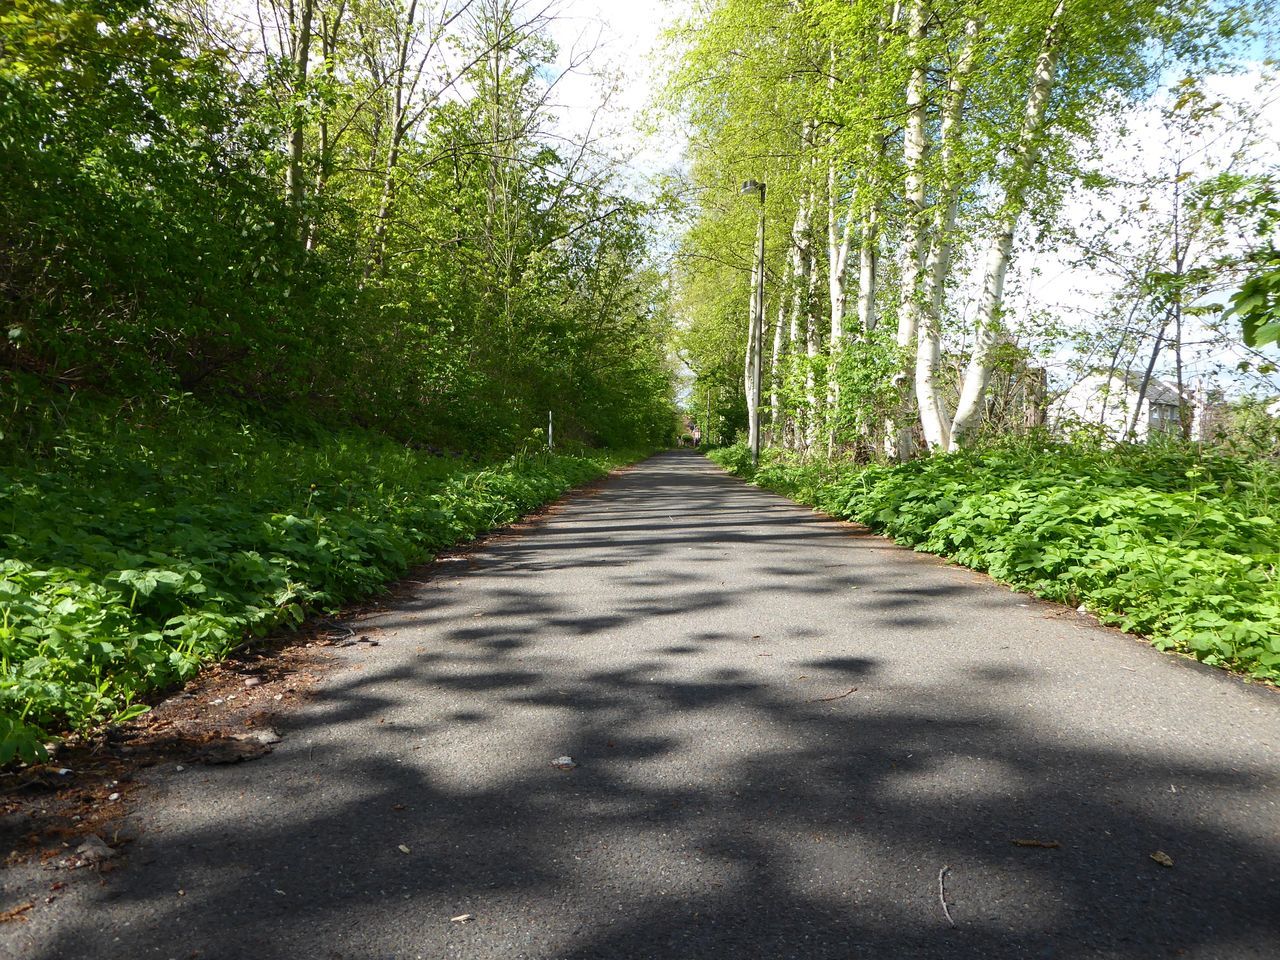 VIEW OF ROAD IN FOREST